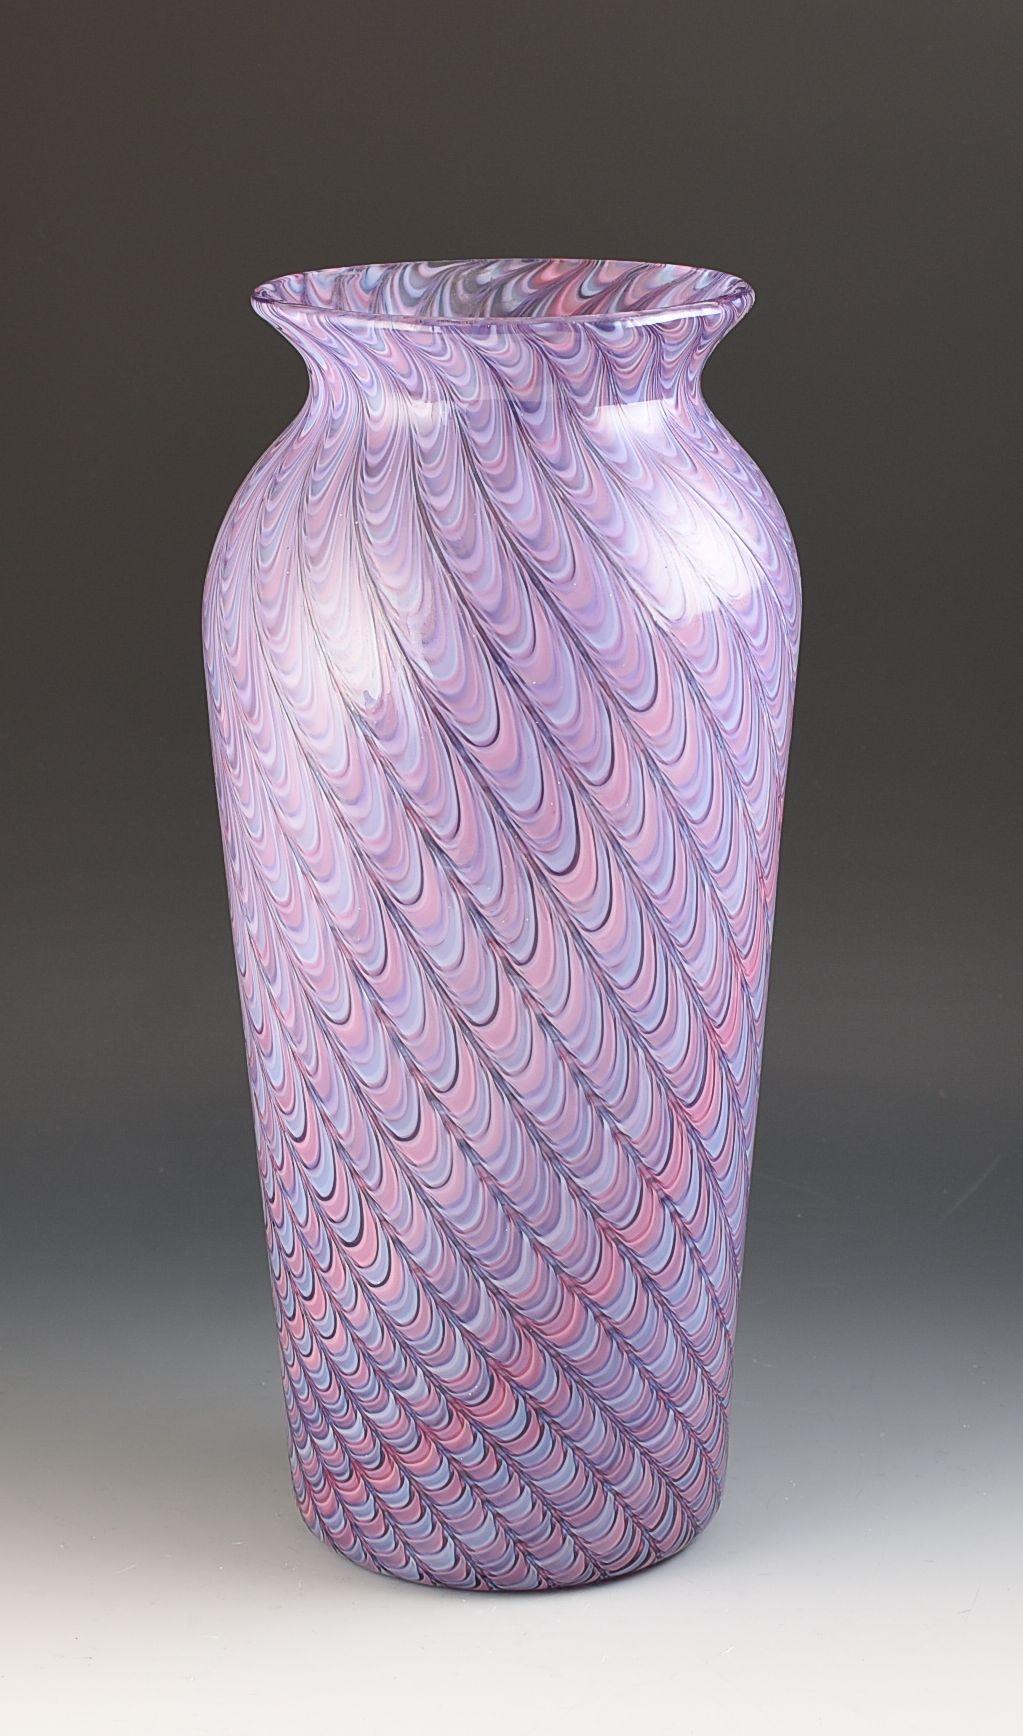 A beautiful Italian Signed Cenedese vase dating to around 1955. Perfect technique and no issues at all. The vase is in perfect original condition and measures 36.5cm in overall height. It is signed Cenedese to the base which was hard to photograph